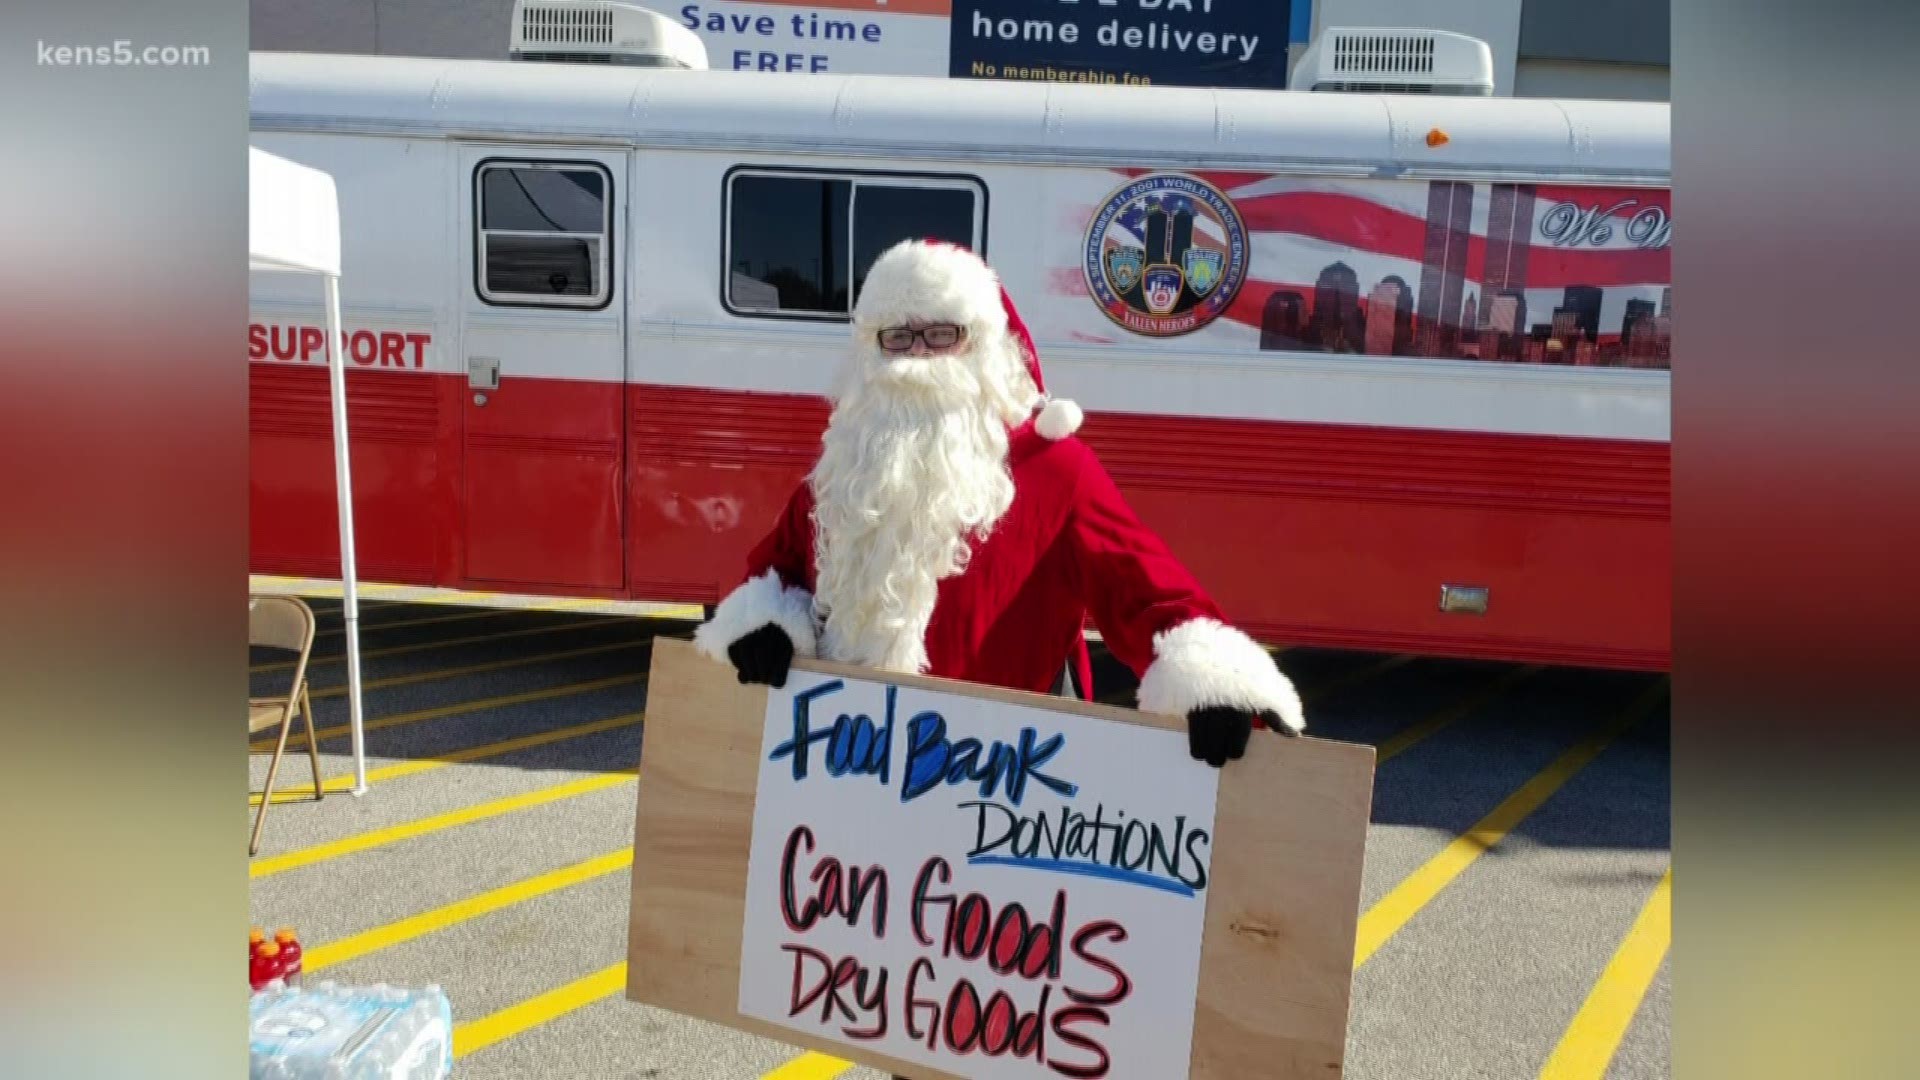 The group will continue to be at Walmart, with Santa for good measure, form 10 a.m. to 4 p.m. Sunday.